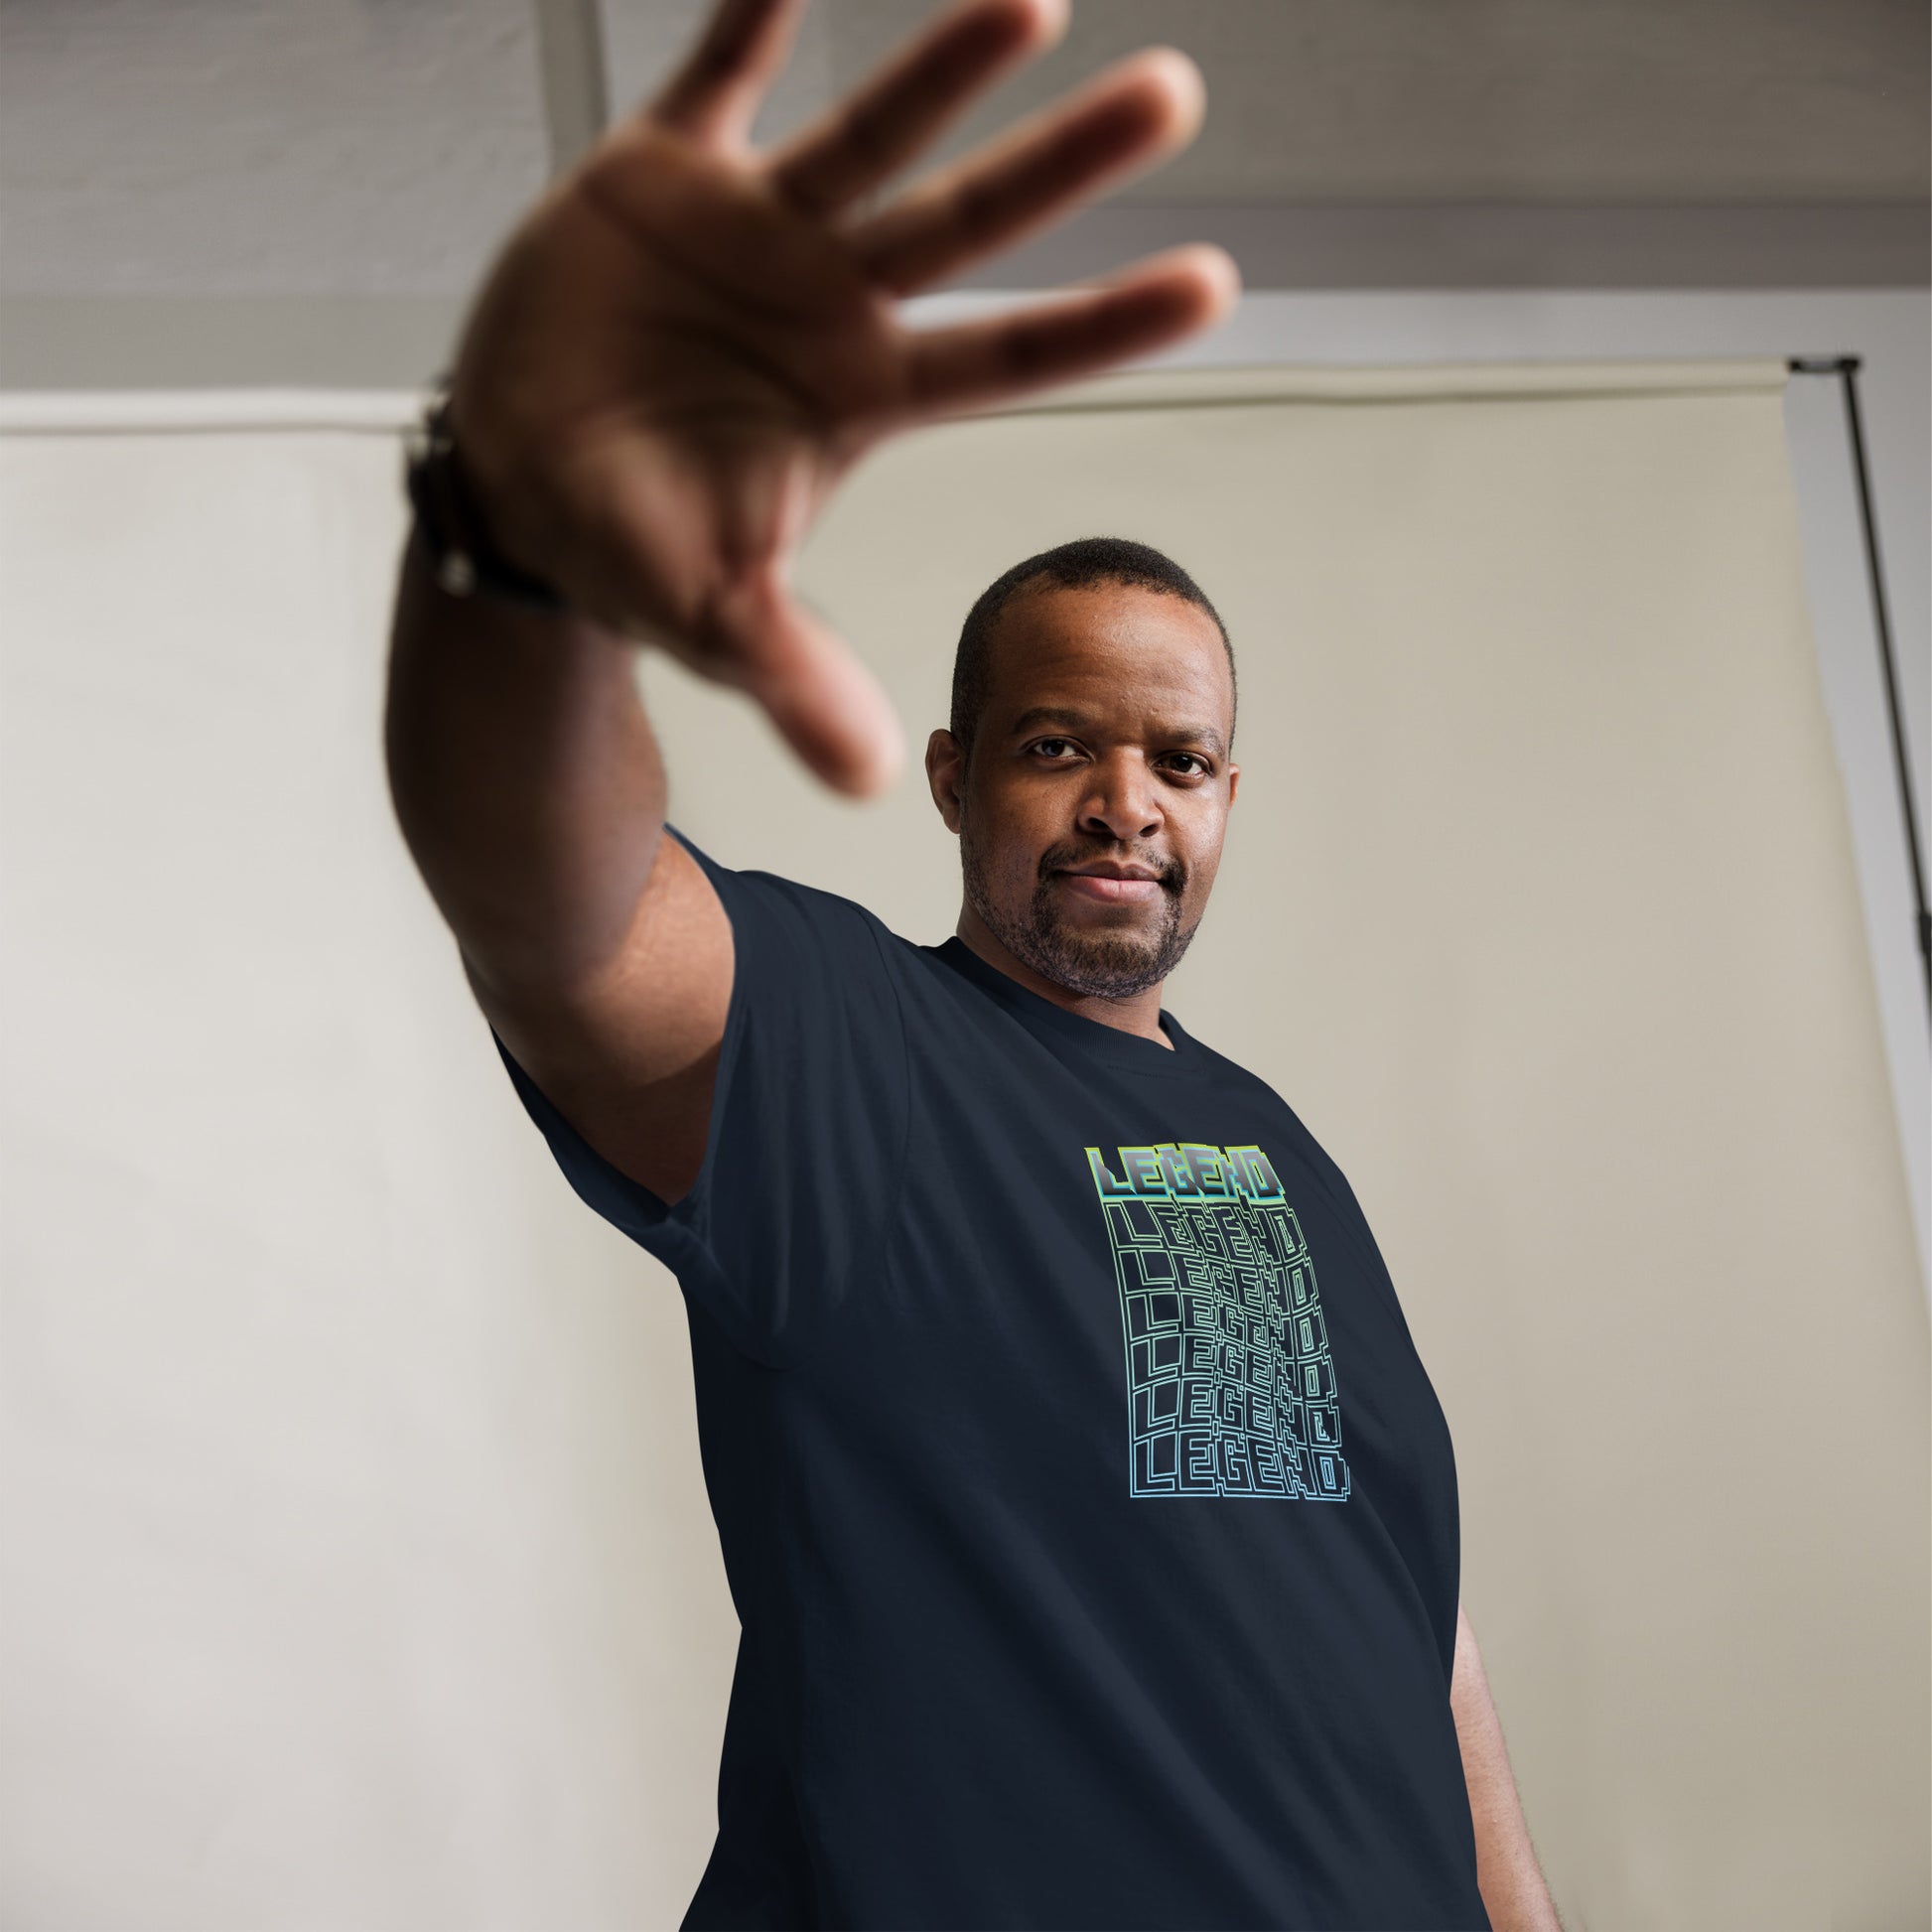 Man extending his hand towards the camera, offering a friendly yet assertive gesture, wearing a navy t-shirt with a 'LEGEND' cube graphic in a green-to-light blue gradient, complemented by a watch and set against a light grey backdrop.